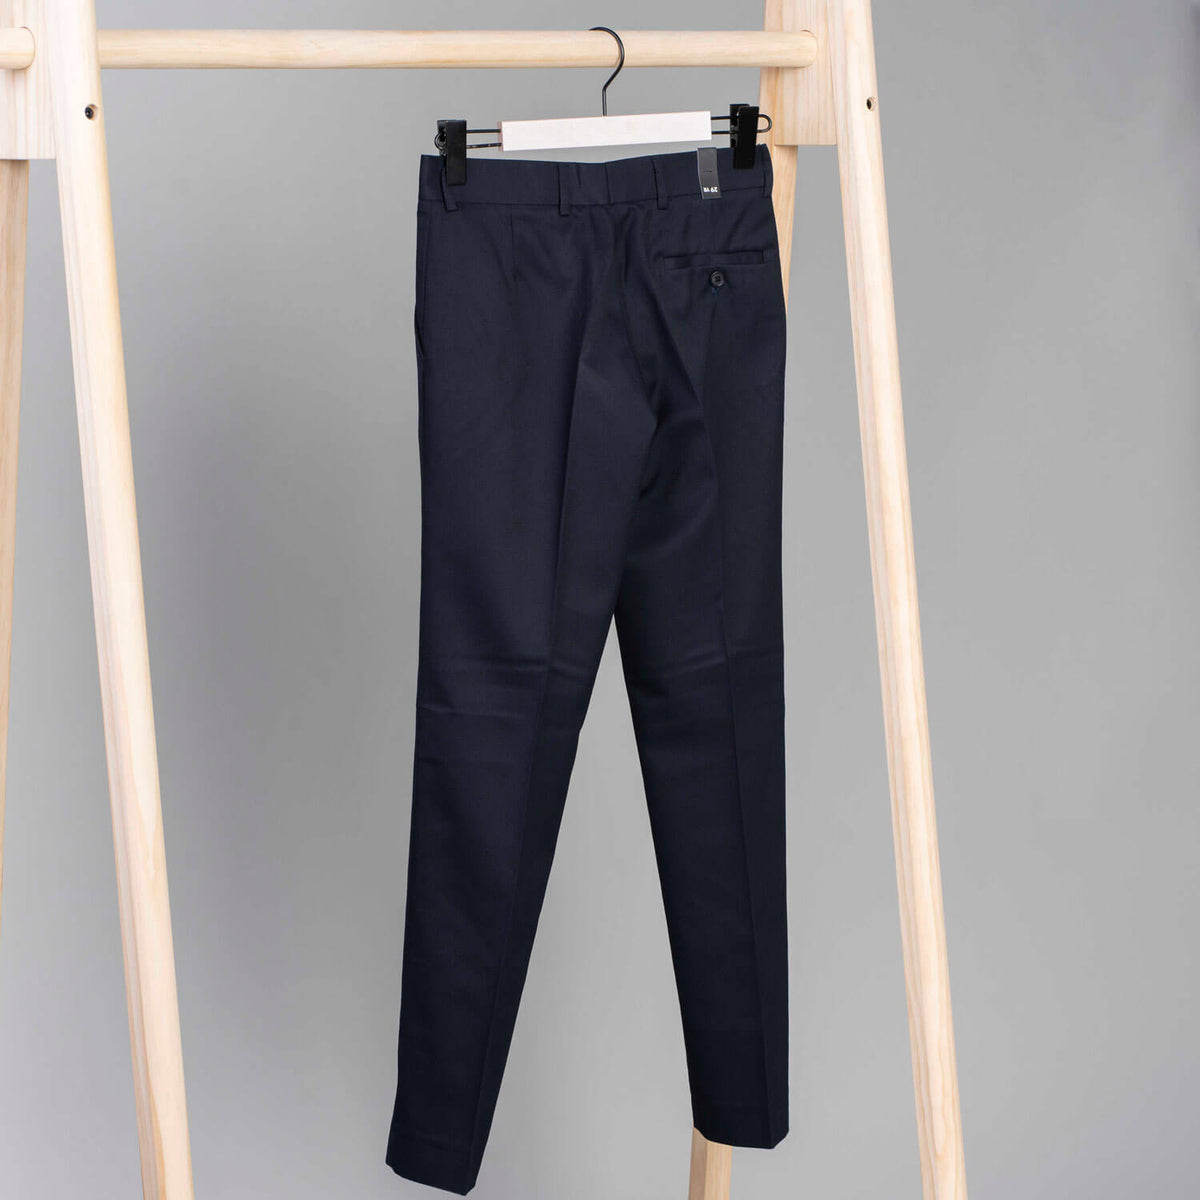 Lewis Youth Boys Trousers - Navy